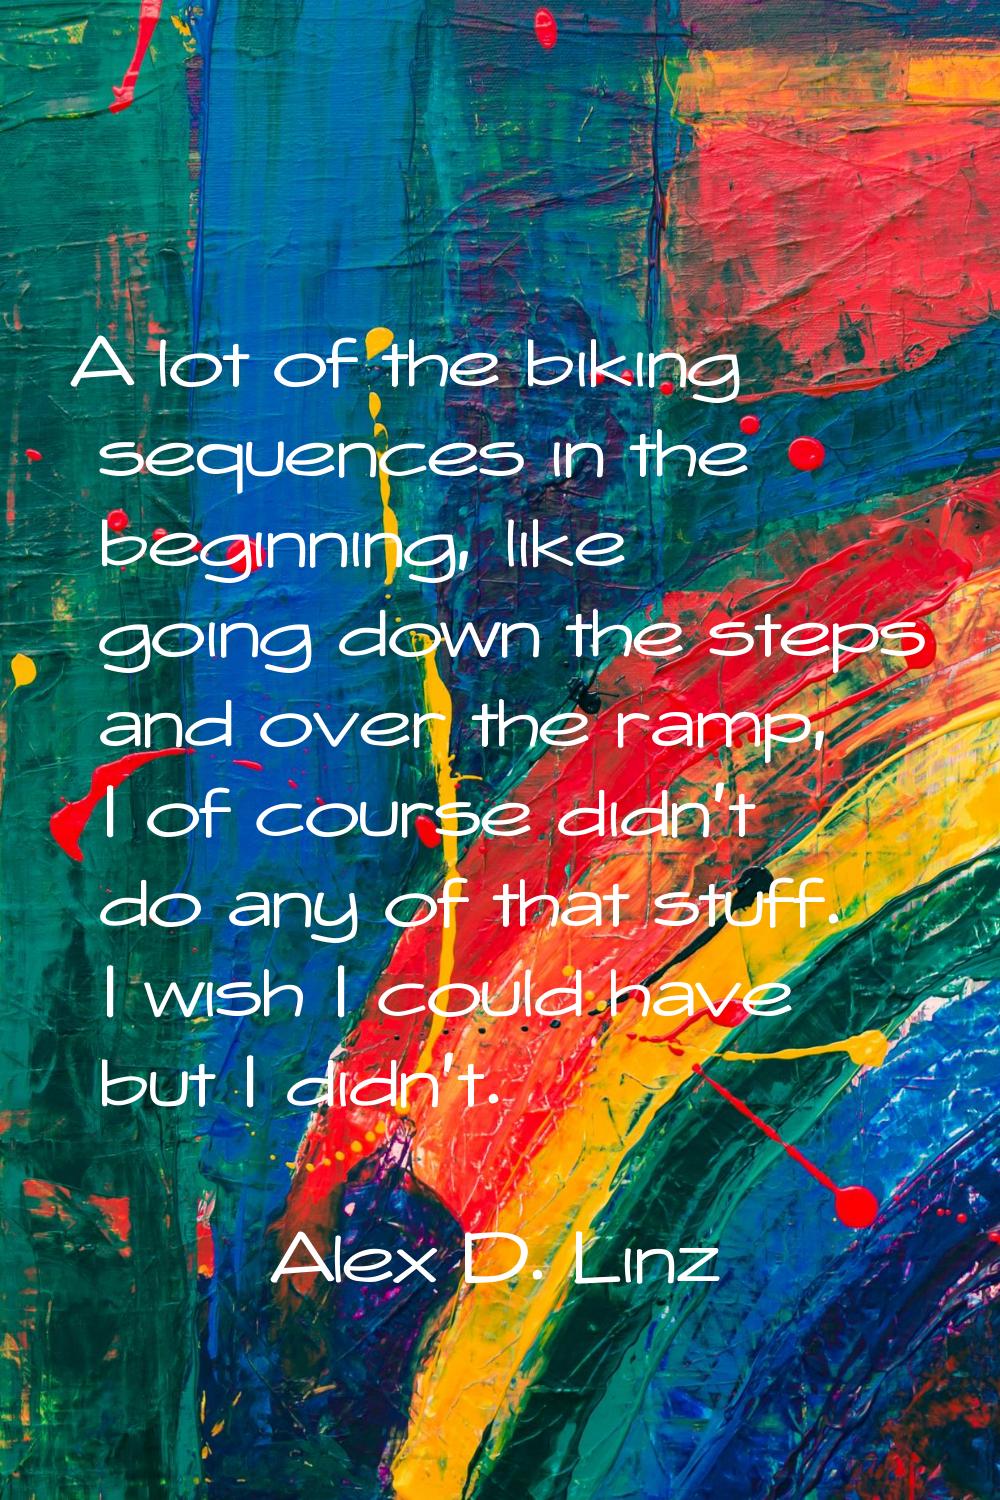 A lot of the biking sequences in the beginning, like going down the steps and over the ramp, I of c